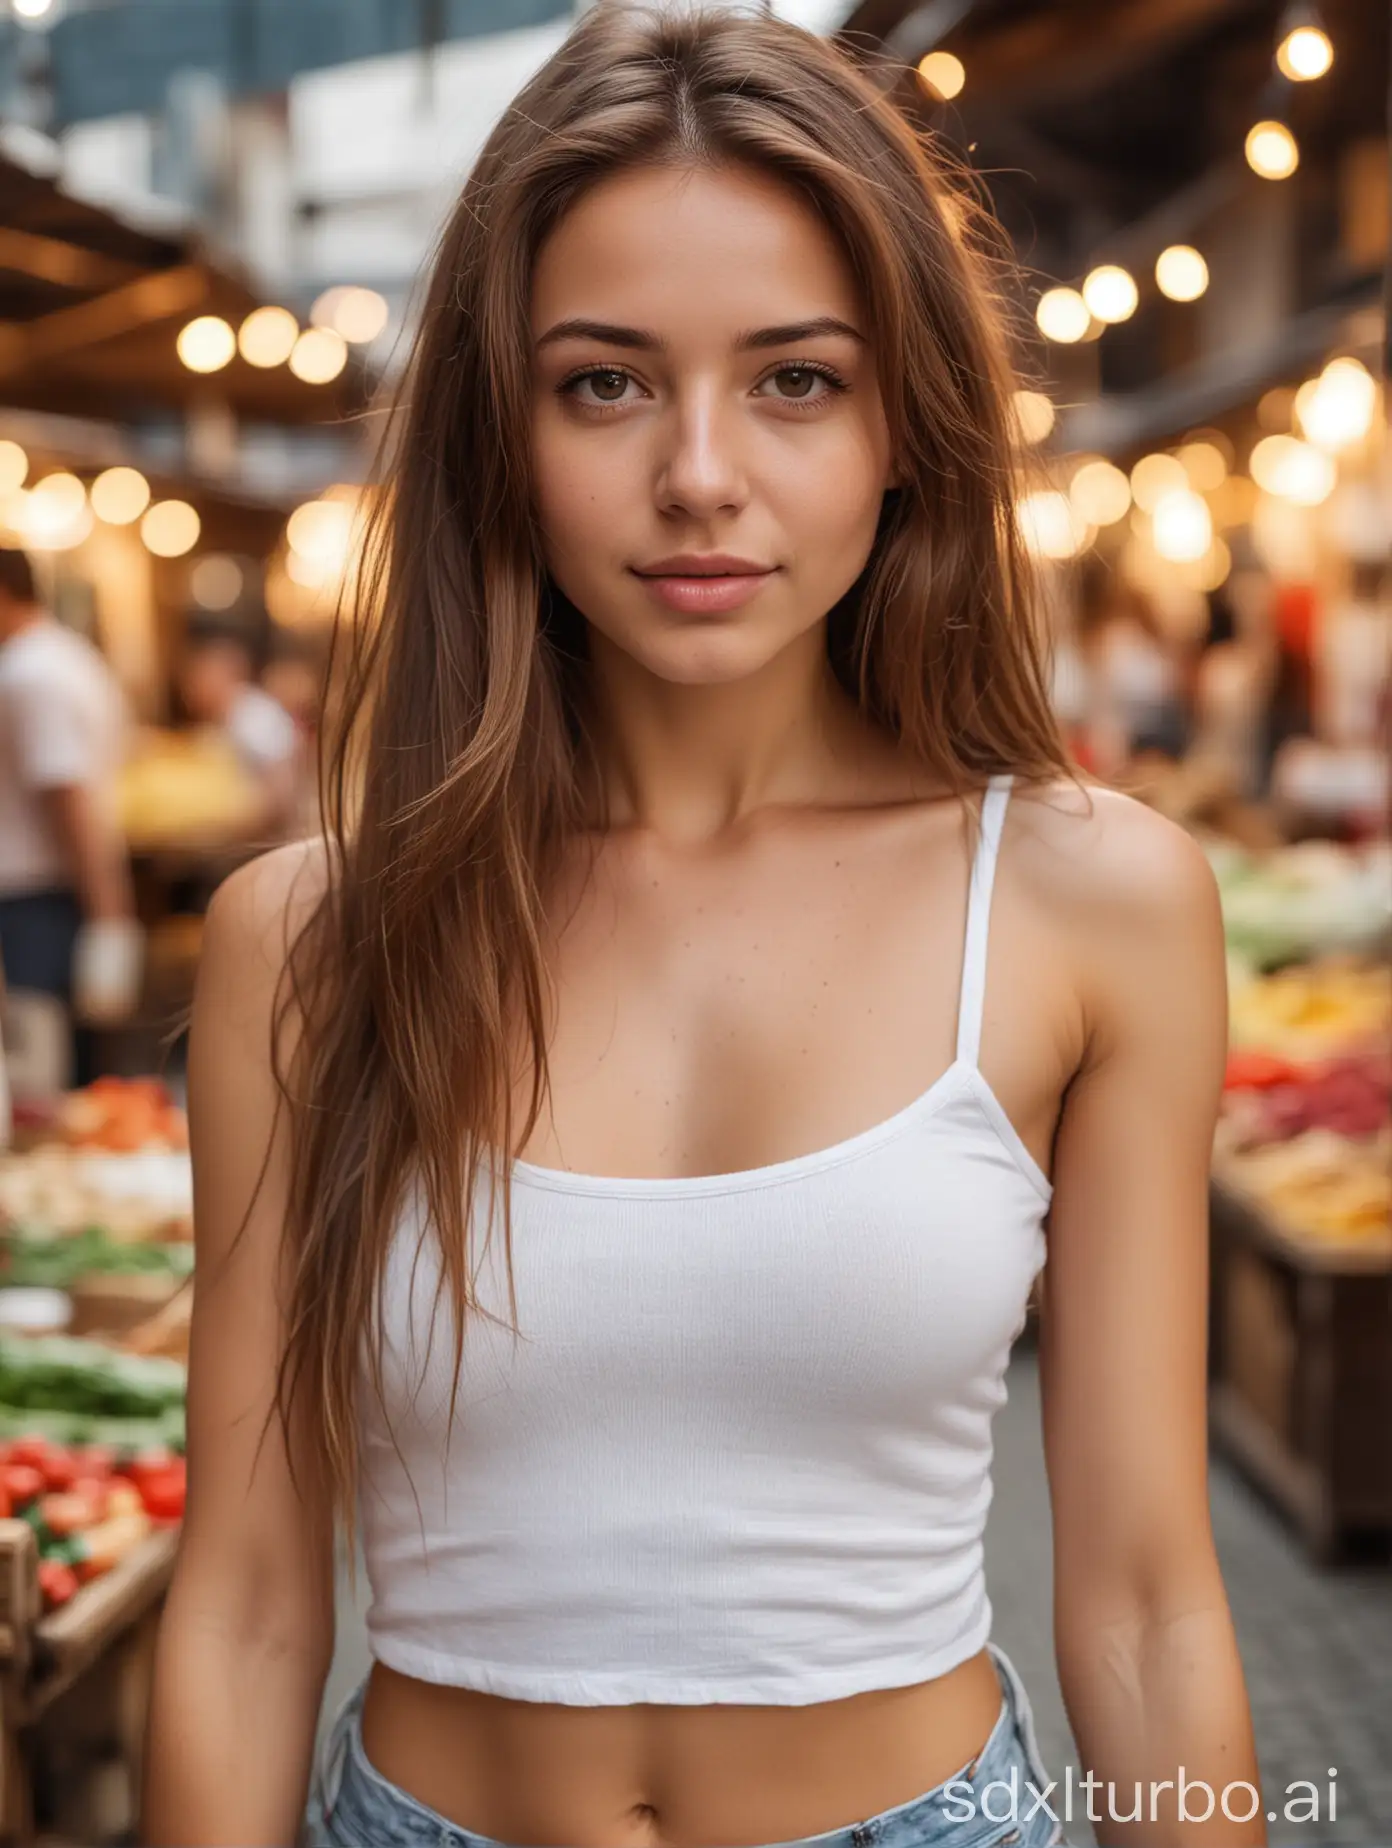 young woman, long brown hair, slim body, small breasts, wearing white tank top, close up, bokeh background, background of a market